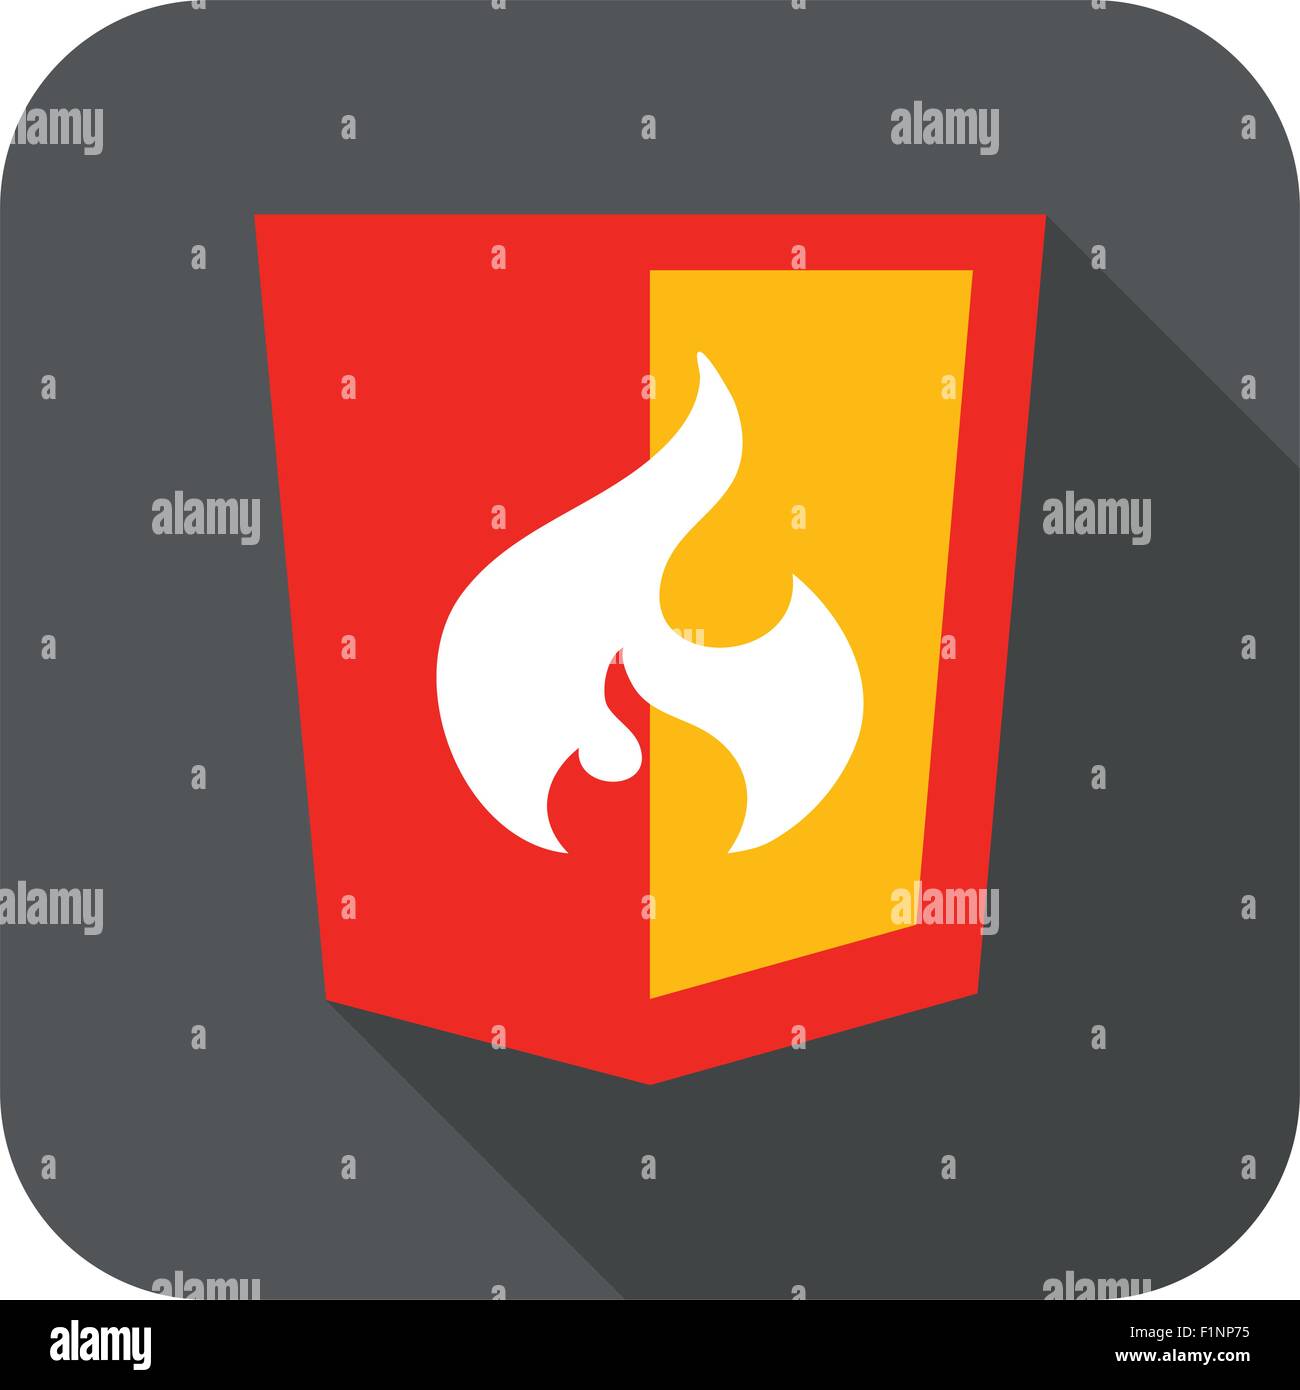 vector illustration of web shield, flame php framework, isolated flat design site development icon on white background Stock Vector